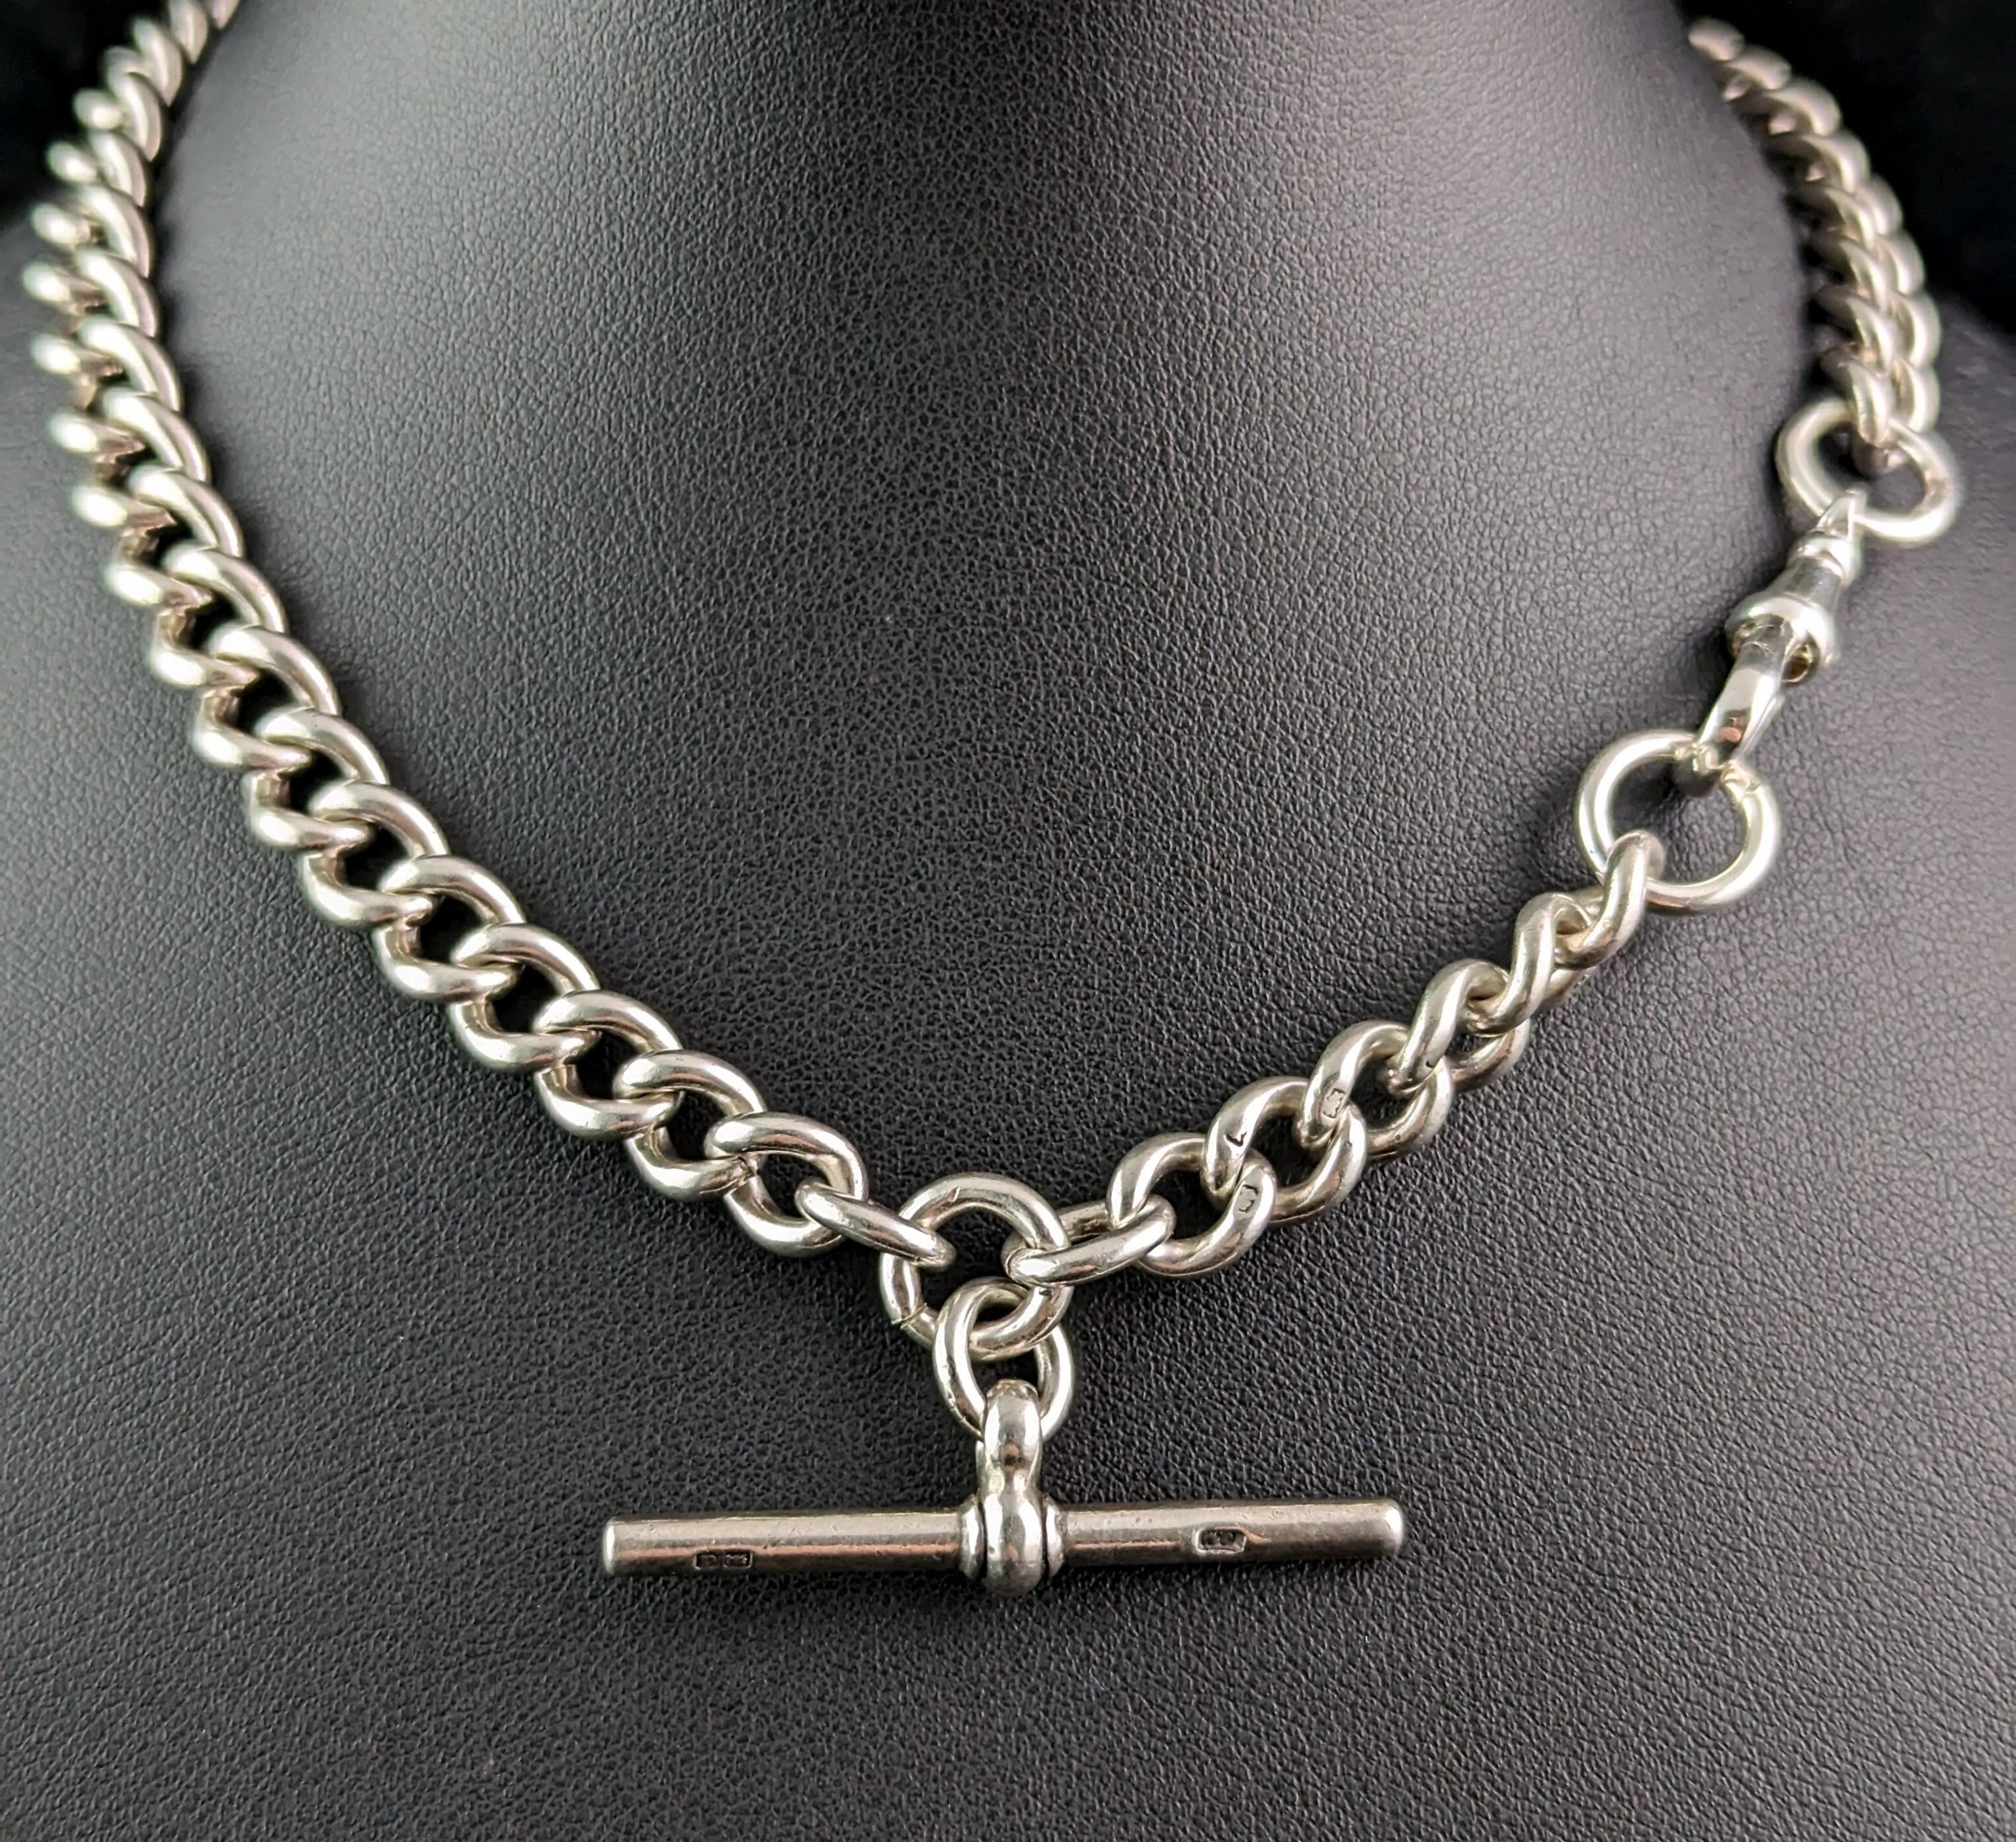 You can't help but fall in love with this handsome antique Albert chain.

It is a wonderfully chunky curb link Albert chain in crisp, cool sterling silver, the links are each stamped with the lion passant for sterling silver and it has a substantial